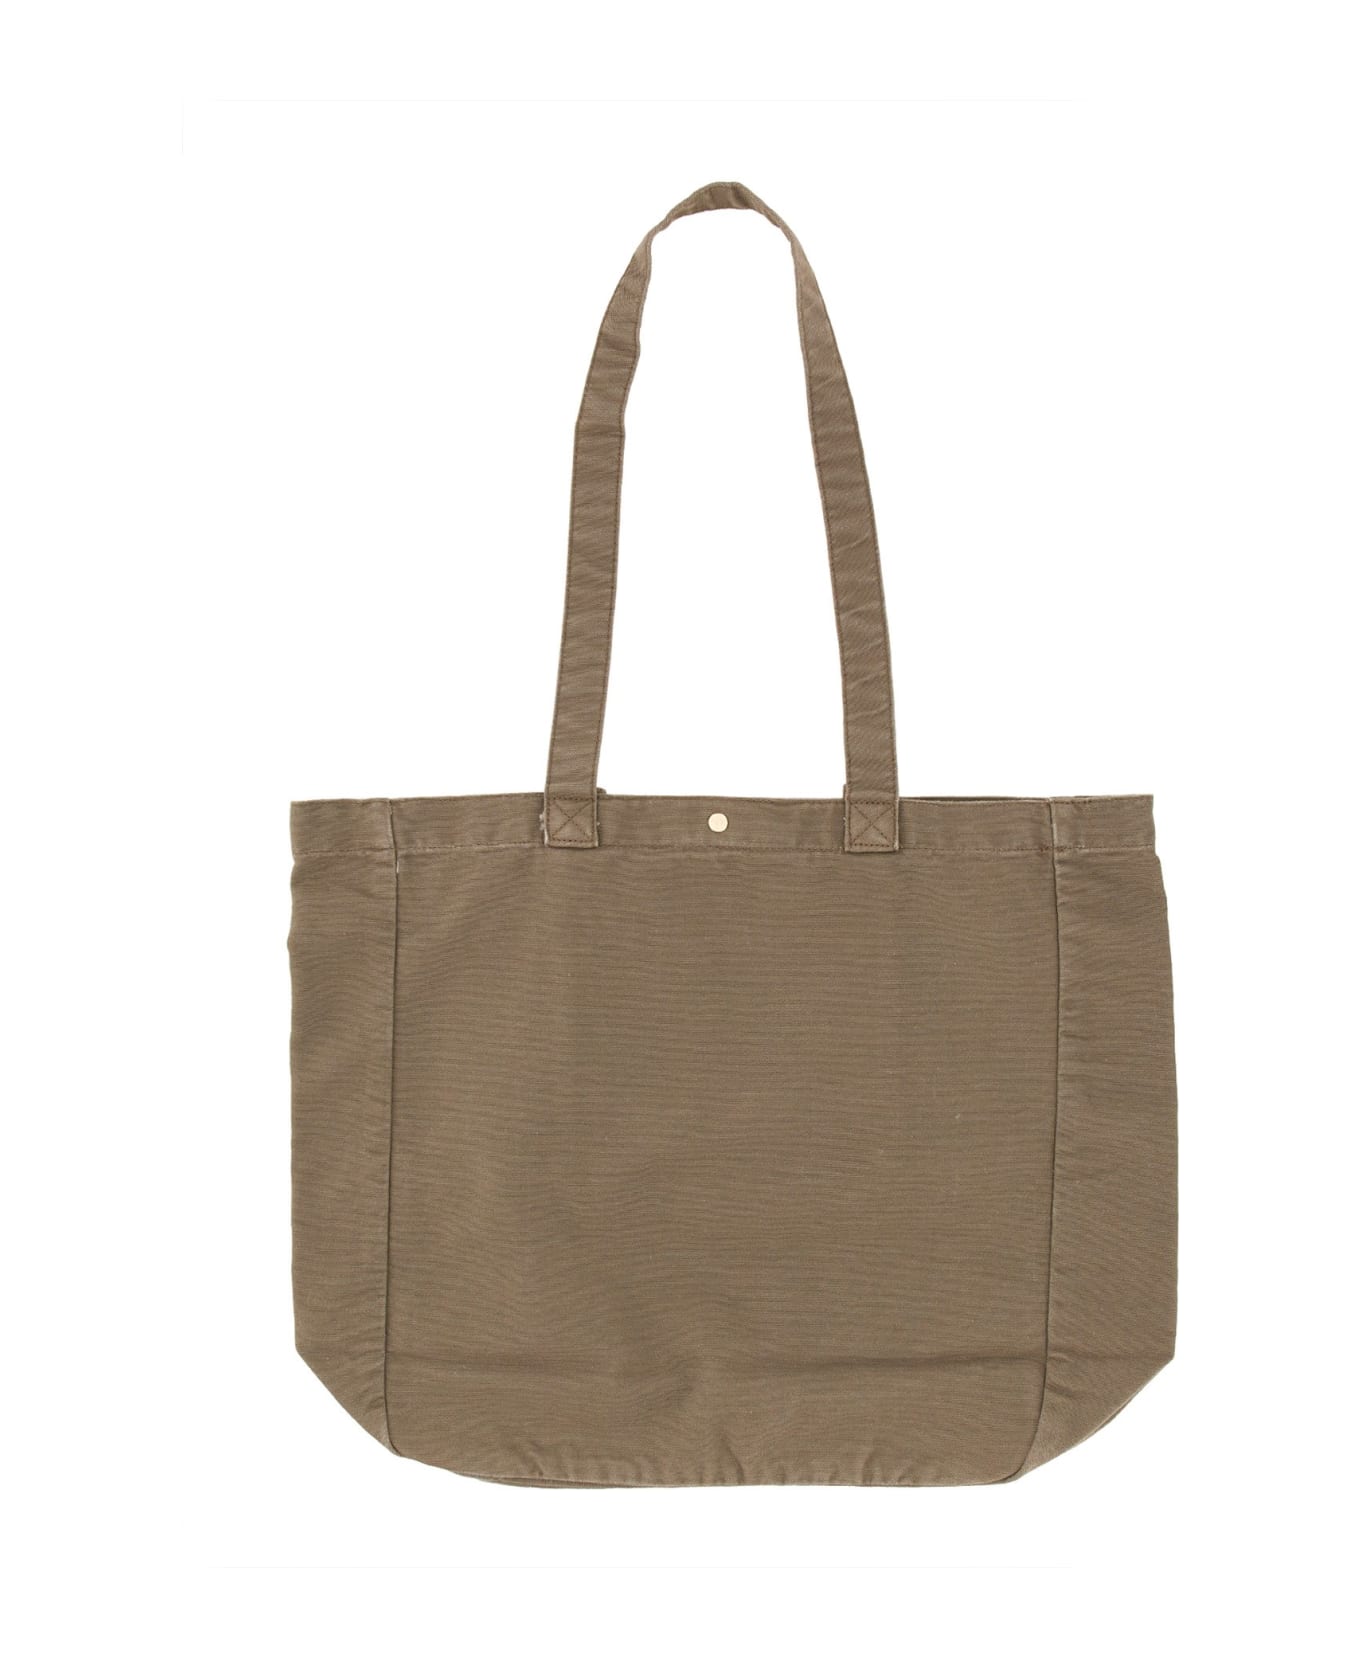 Carhartt Tote Bag With Logo - Barista stone washed